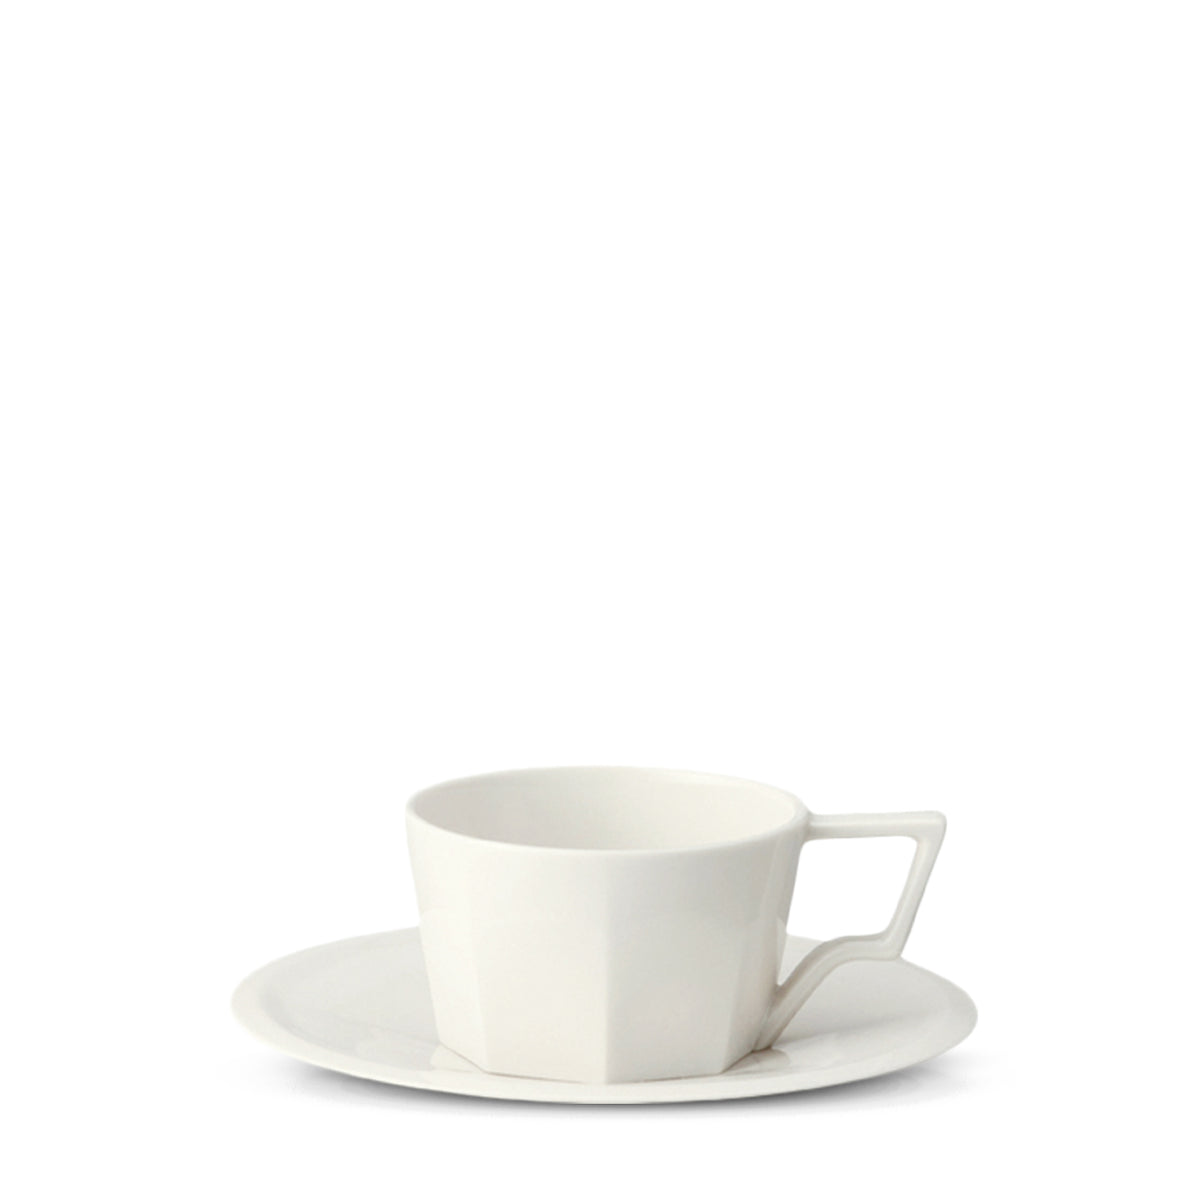 OCT Cup & Saucer by KINTO